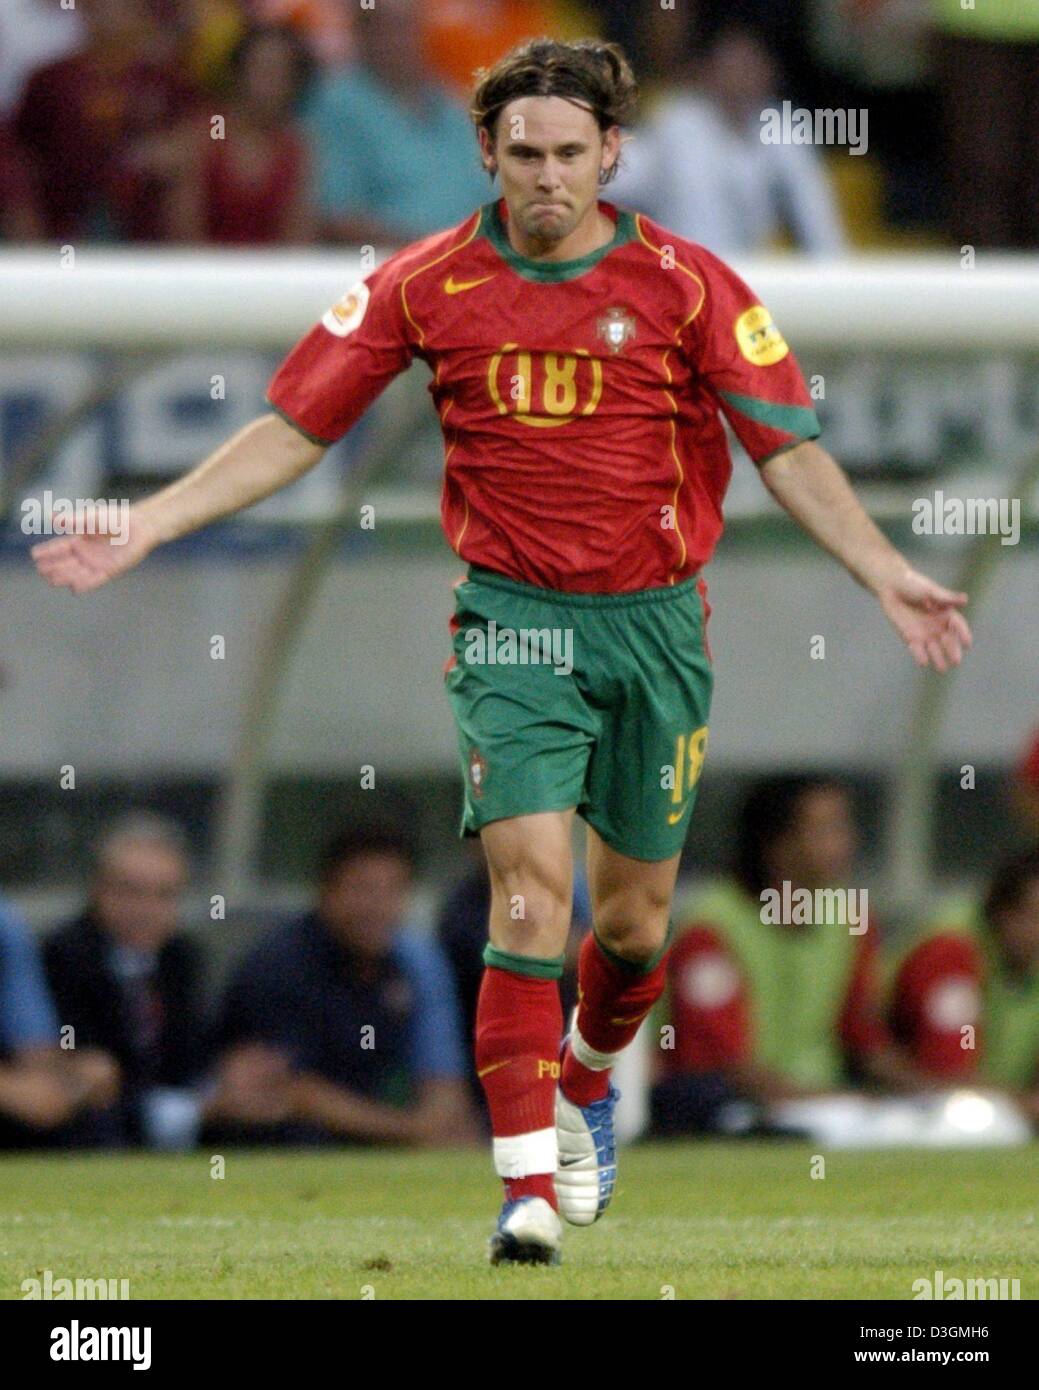 (dpa) - Portugal's midfielder Maniche cheers after scoring the 2-0 lead during the Euro 2004 semi final game opposing Portugal and the Netherlands in Lisbon, Portugal, 30 June 2004. Portugal eliminated the Netherlands with a 2-1 win, achieving its first ever qualification for the European final.  +++NO MOBILE APPLICATIONS +++ Stock Photo